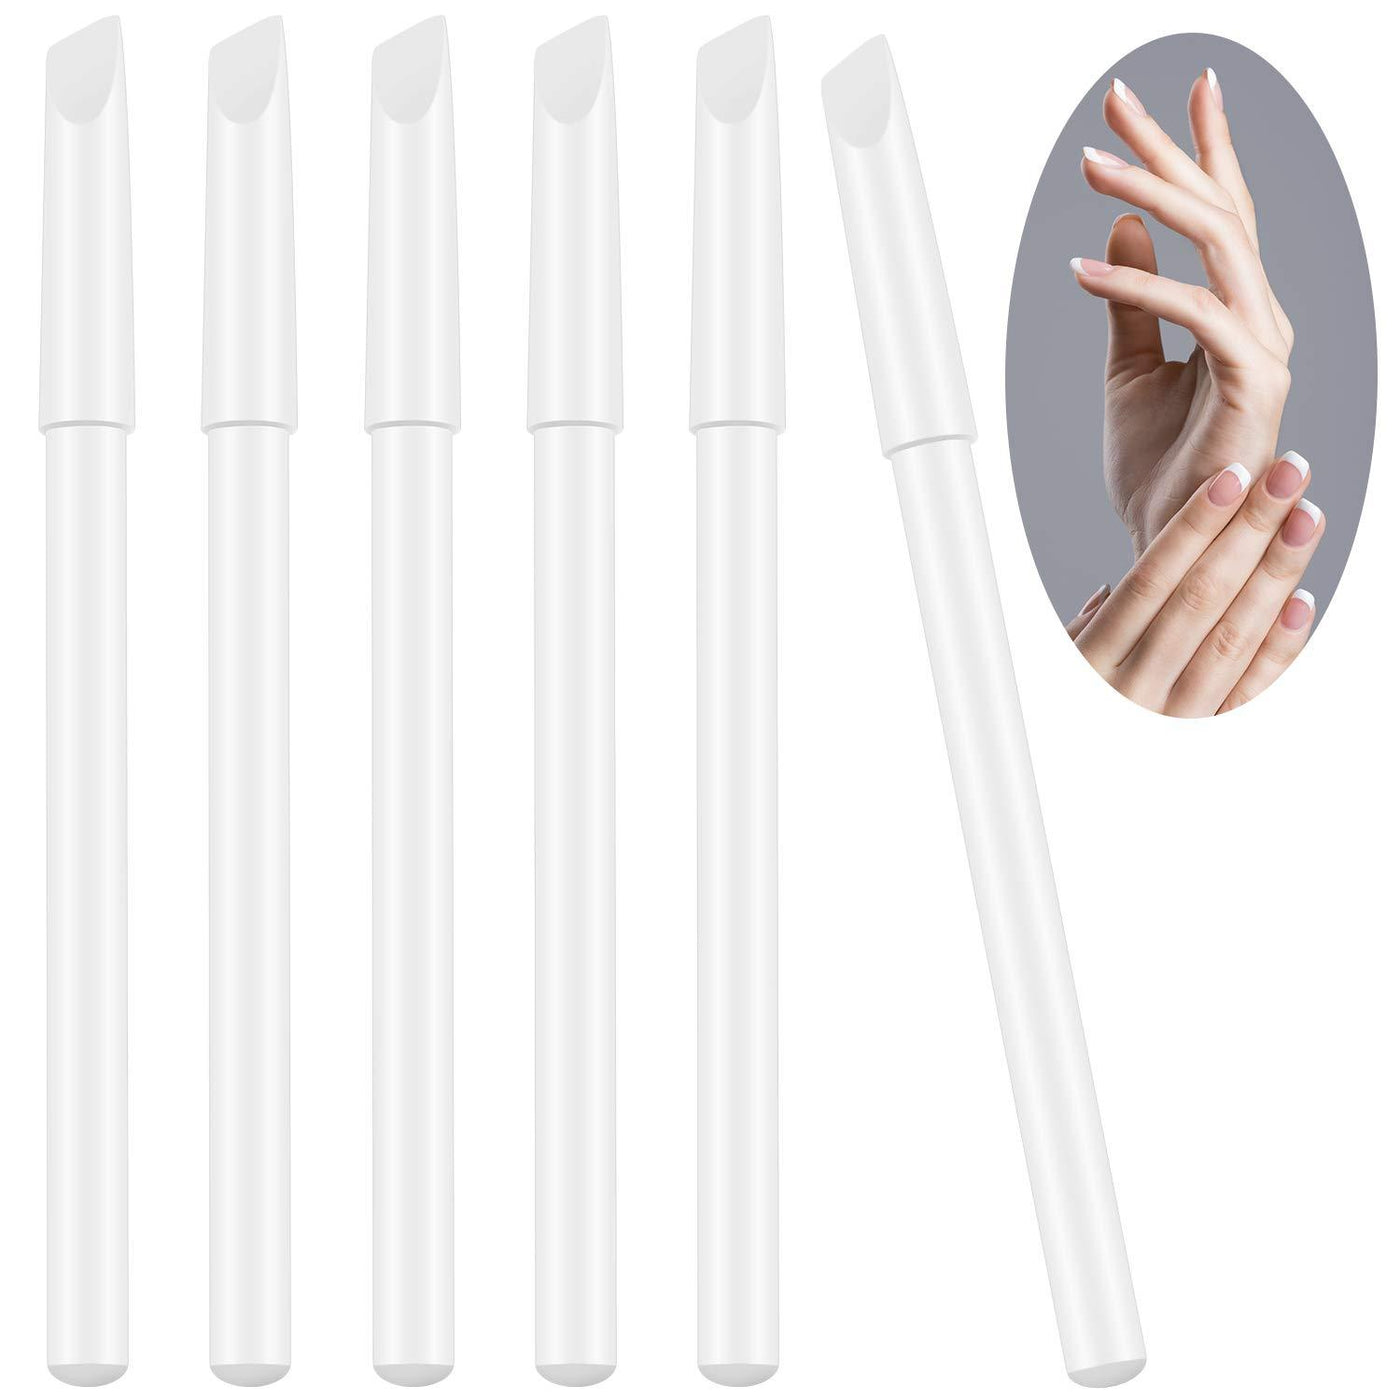 12 Pieces White Nail Pencil 2-in-1 Nail Whitening Pencils French Nail  Design Pencils with Cuticle Pusher for DIY Nail Design Manicure Supplies :  : Beauty